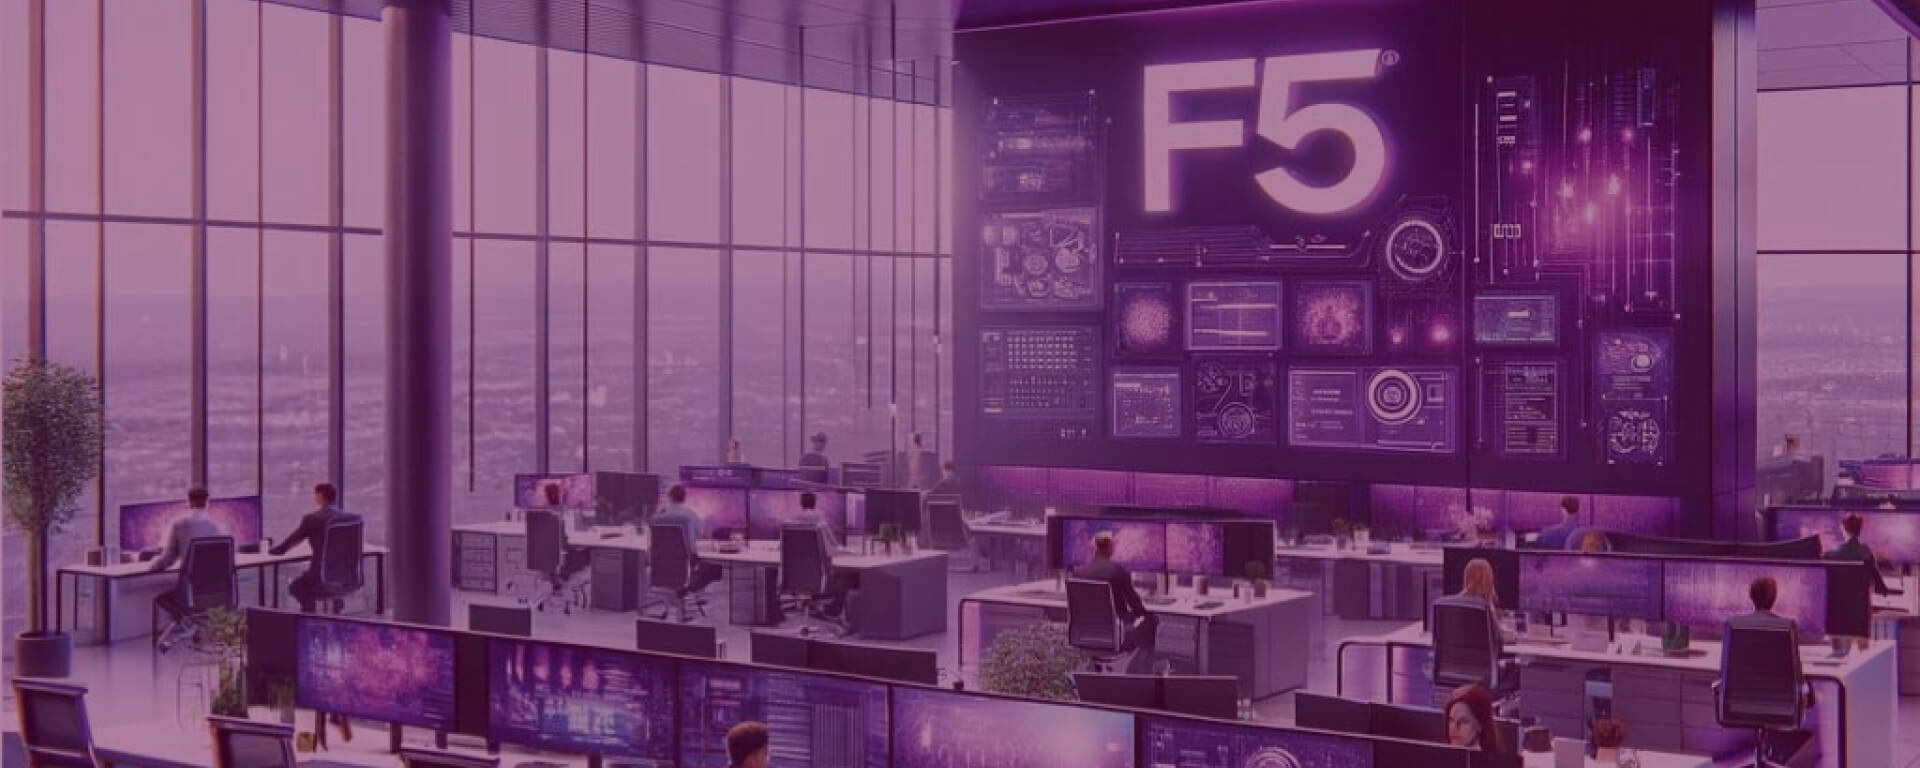 F5 - saas-backup-solutions- f5_banner